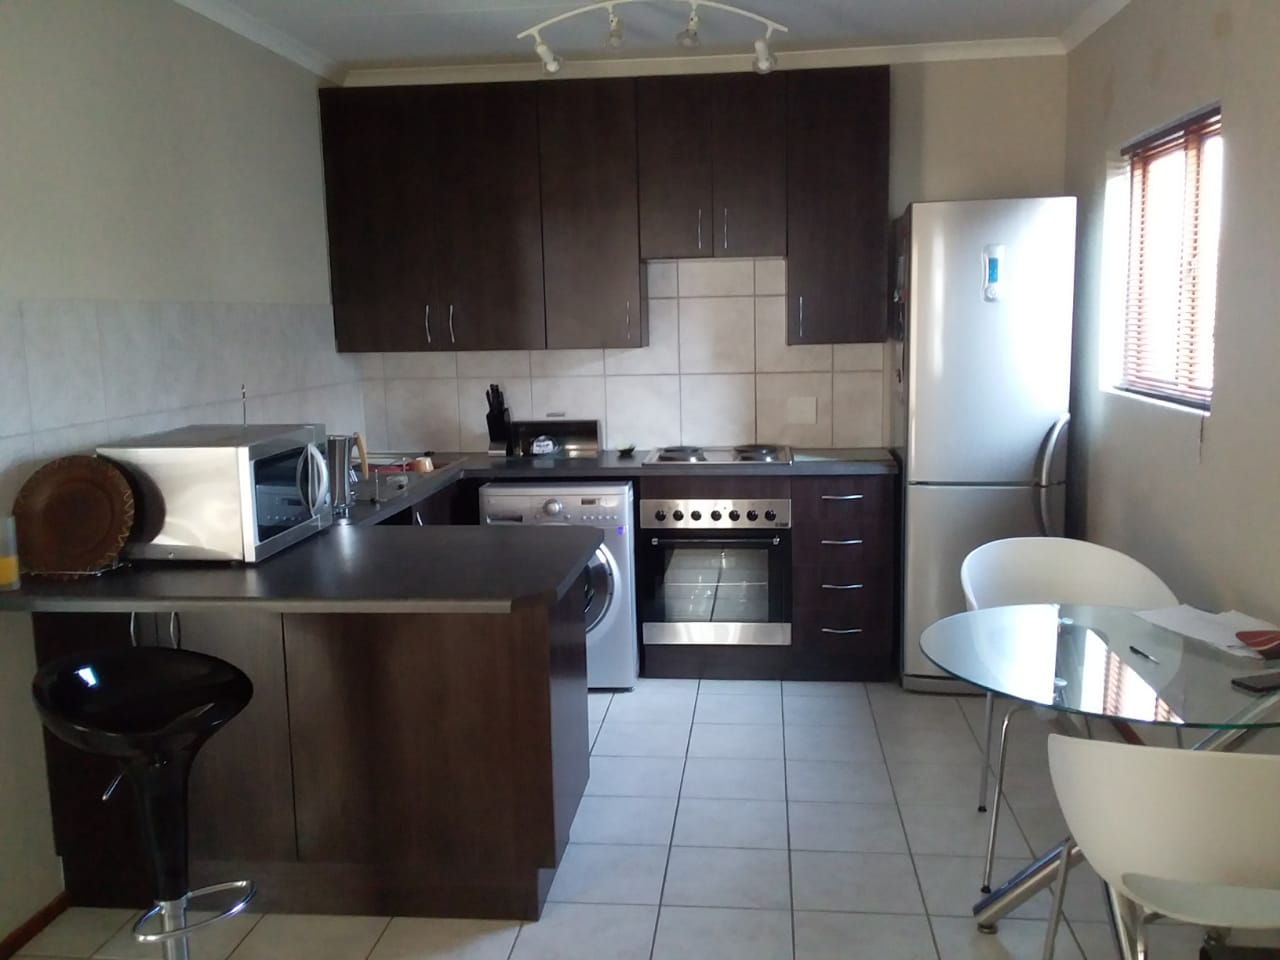 2 Bedroom Flat For Rental At Midrand Stalling Complex Junk Mail